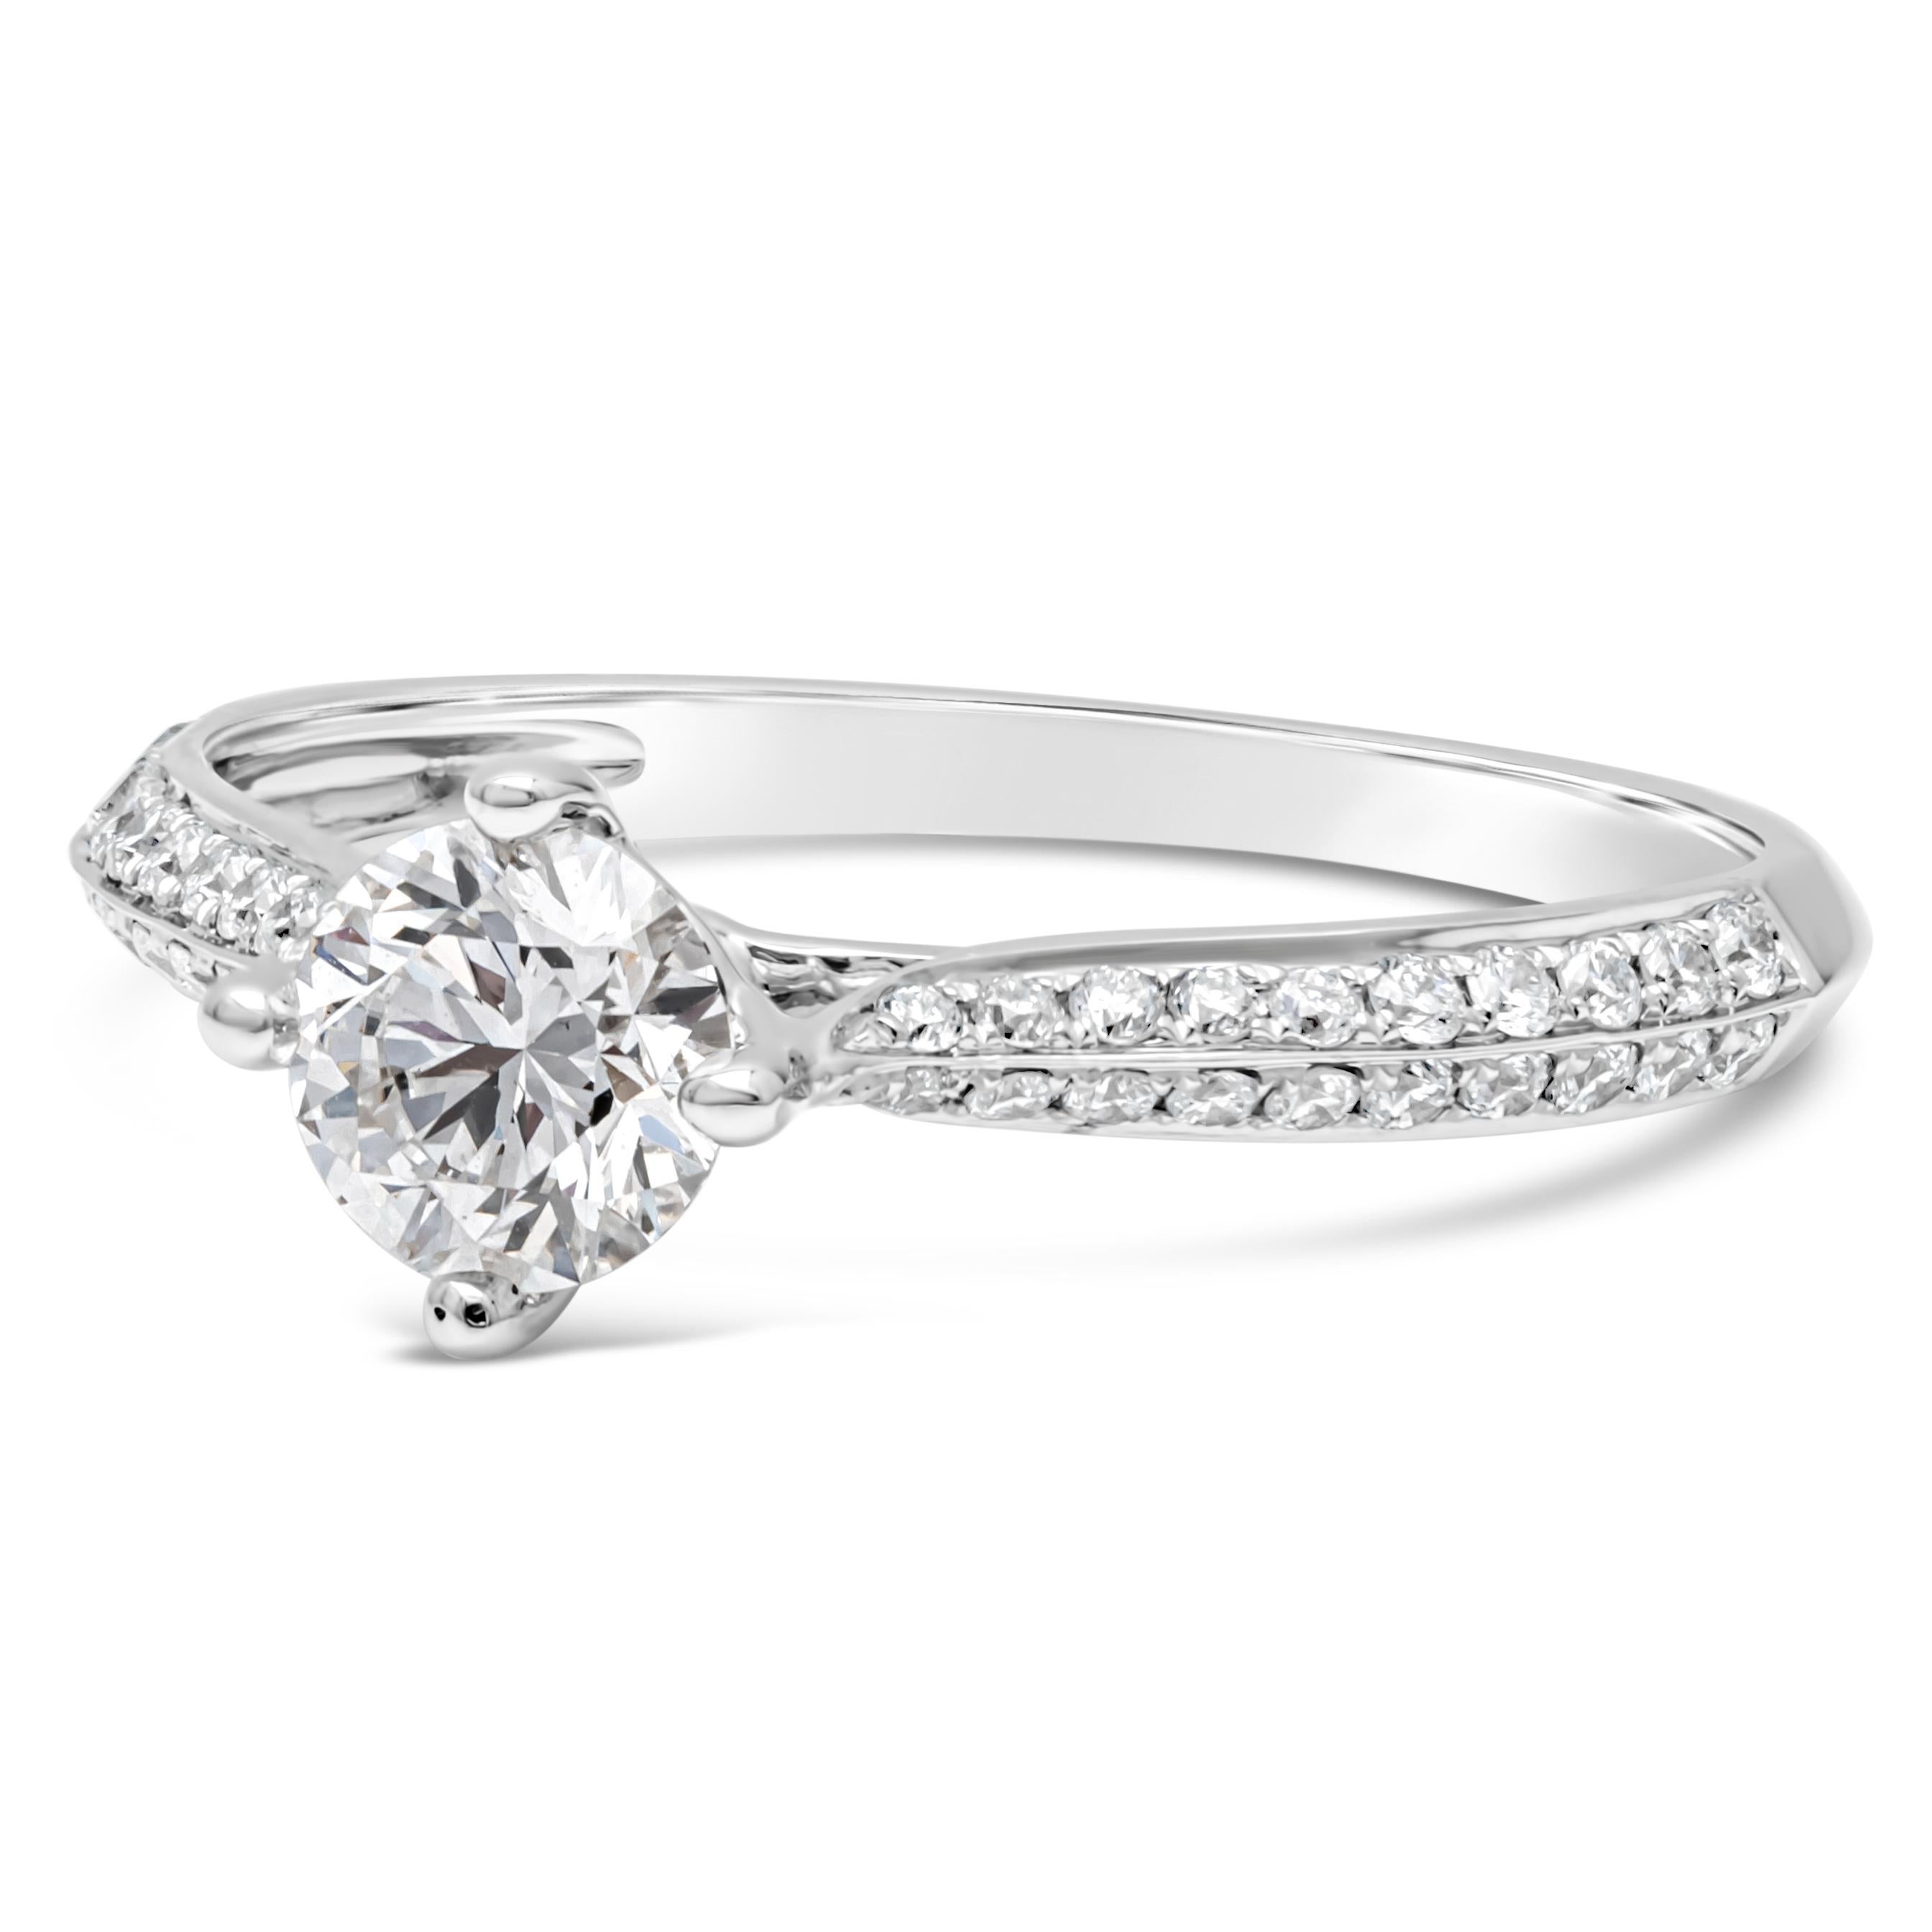 A classic engagement ring showcasing a 0.51 carat round brilliant diamond, GIA certified as F Color and VS2 in clarity. Set in a four prong basket setting. Accented with 0.25 carats total pave-set round diamonds half way around the band. Finely made